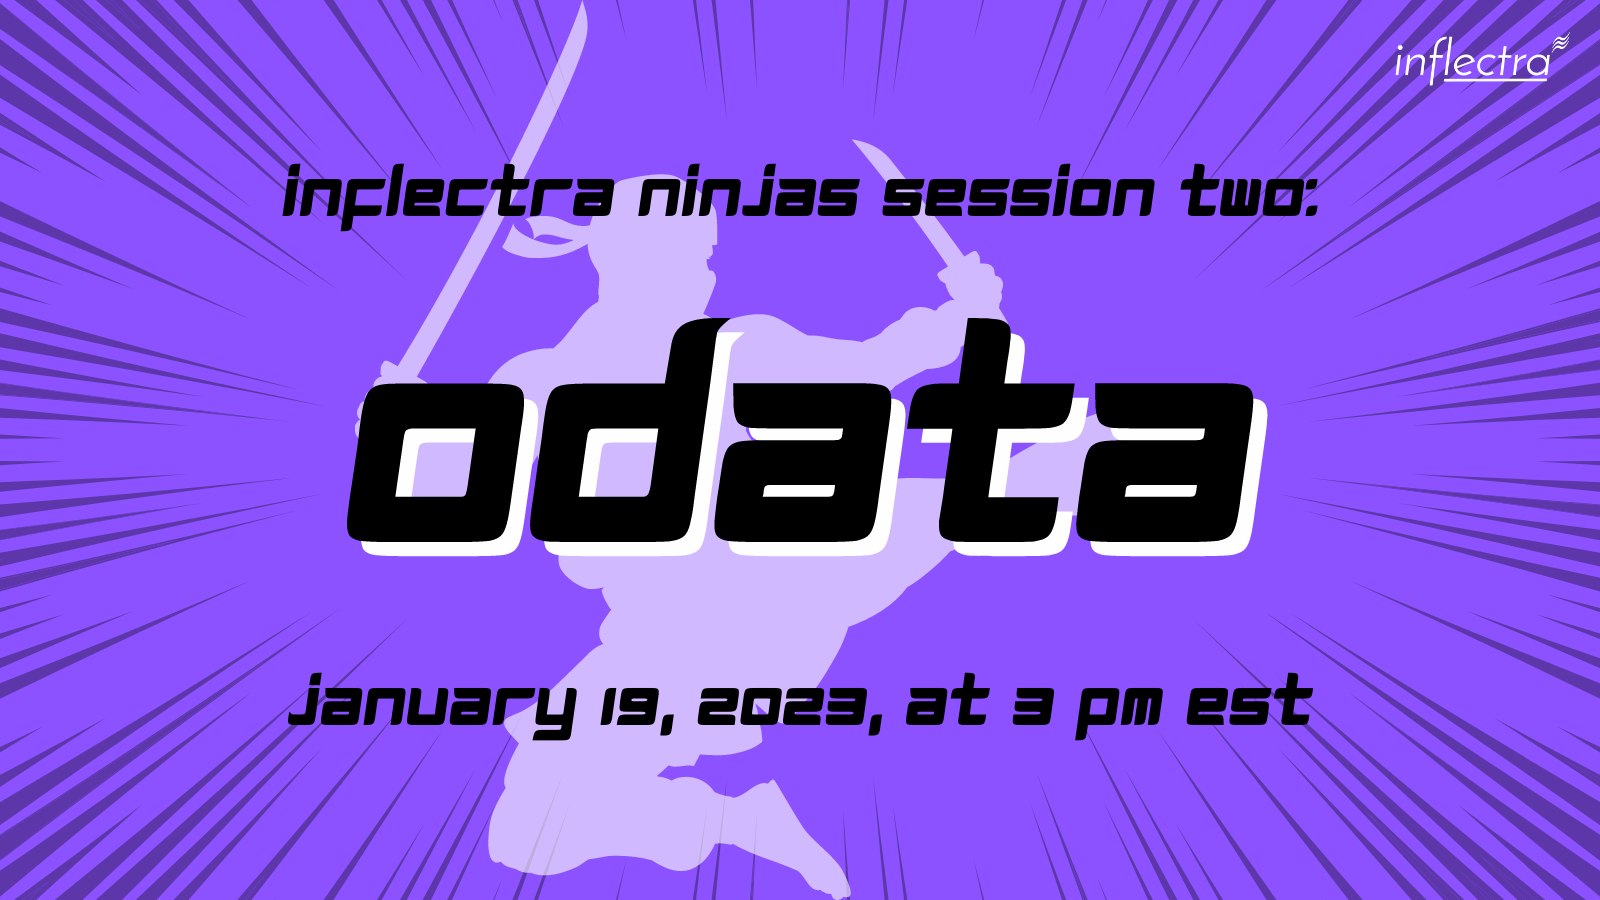 inflectra-ninjas-session-two-odata-purple-background-black-text-january-twelfth-at-three-pm-eastern-standard-time-image